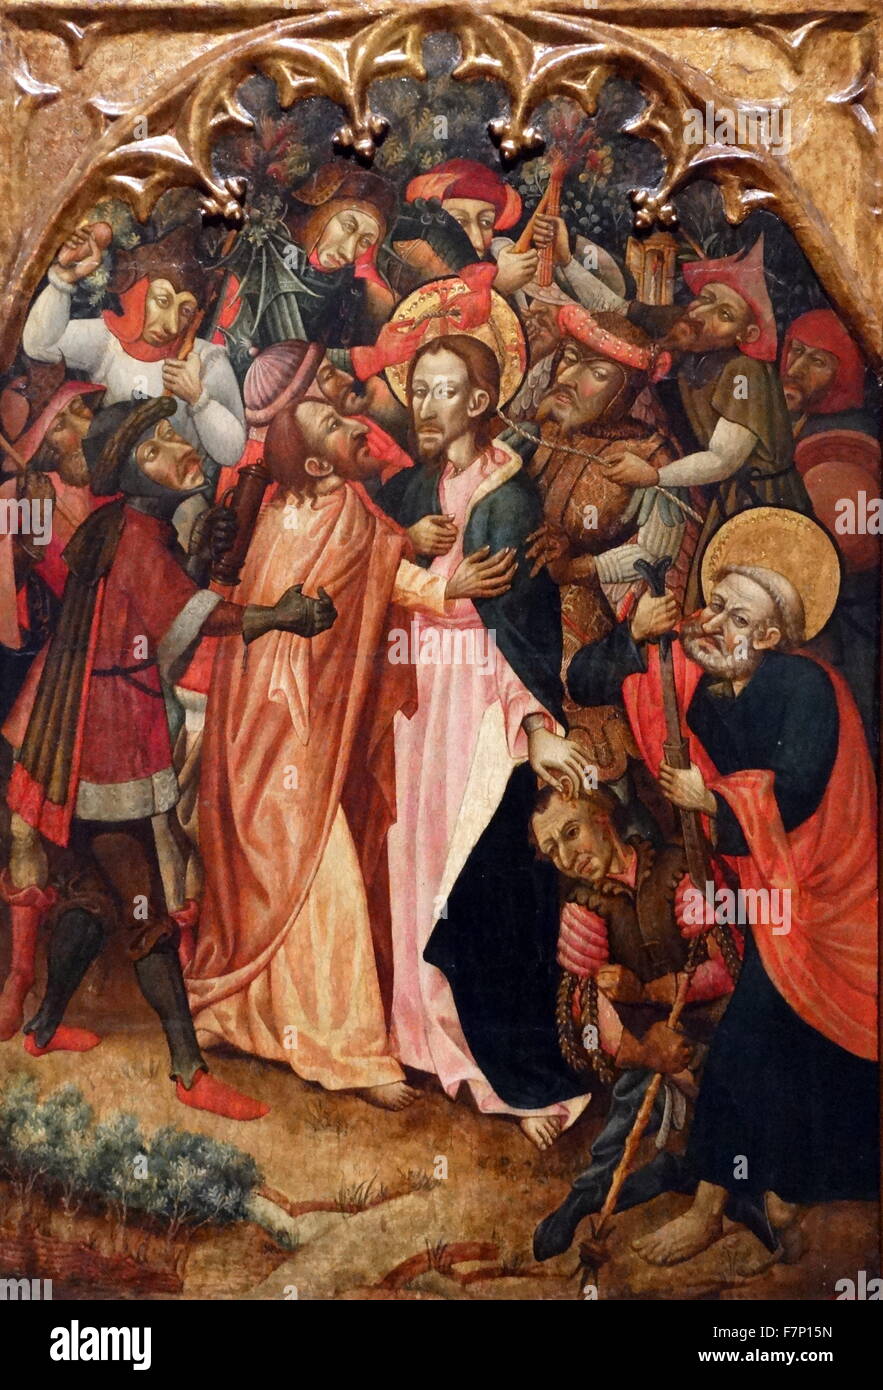 A panel of an altarpiece of the VirginEmbrace in the Golden Gate by Master Retascón. Dated 15th Century Stock Photo